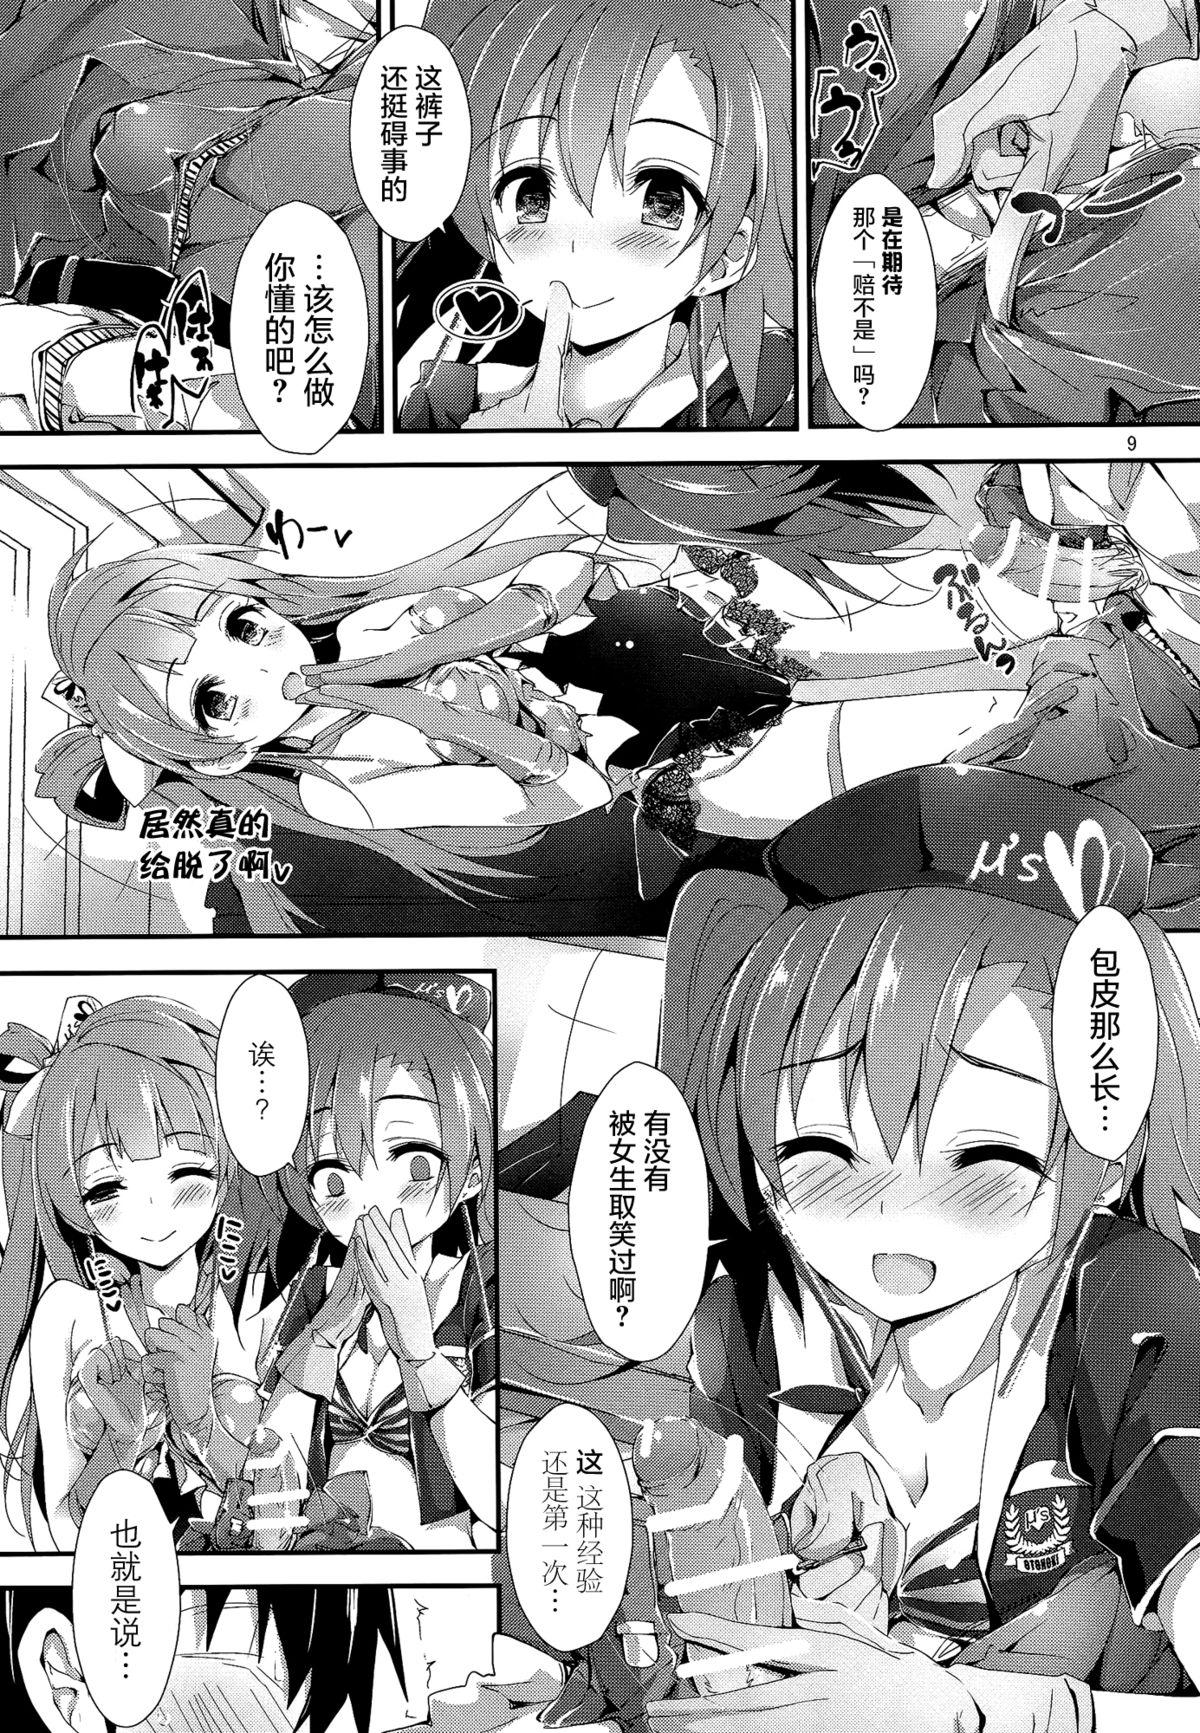 Milf Sex No regred payls - Love live Com - Page 10